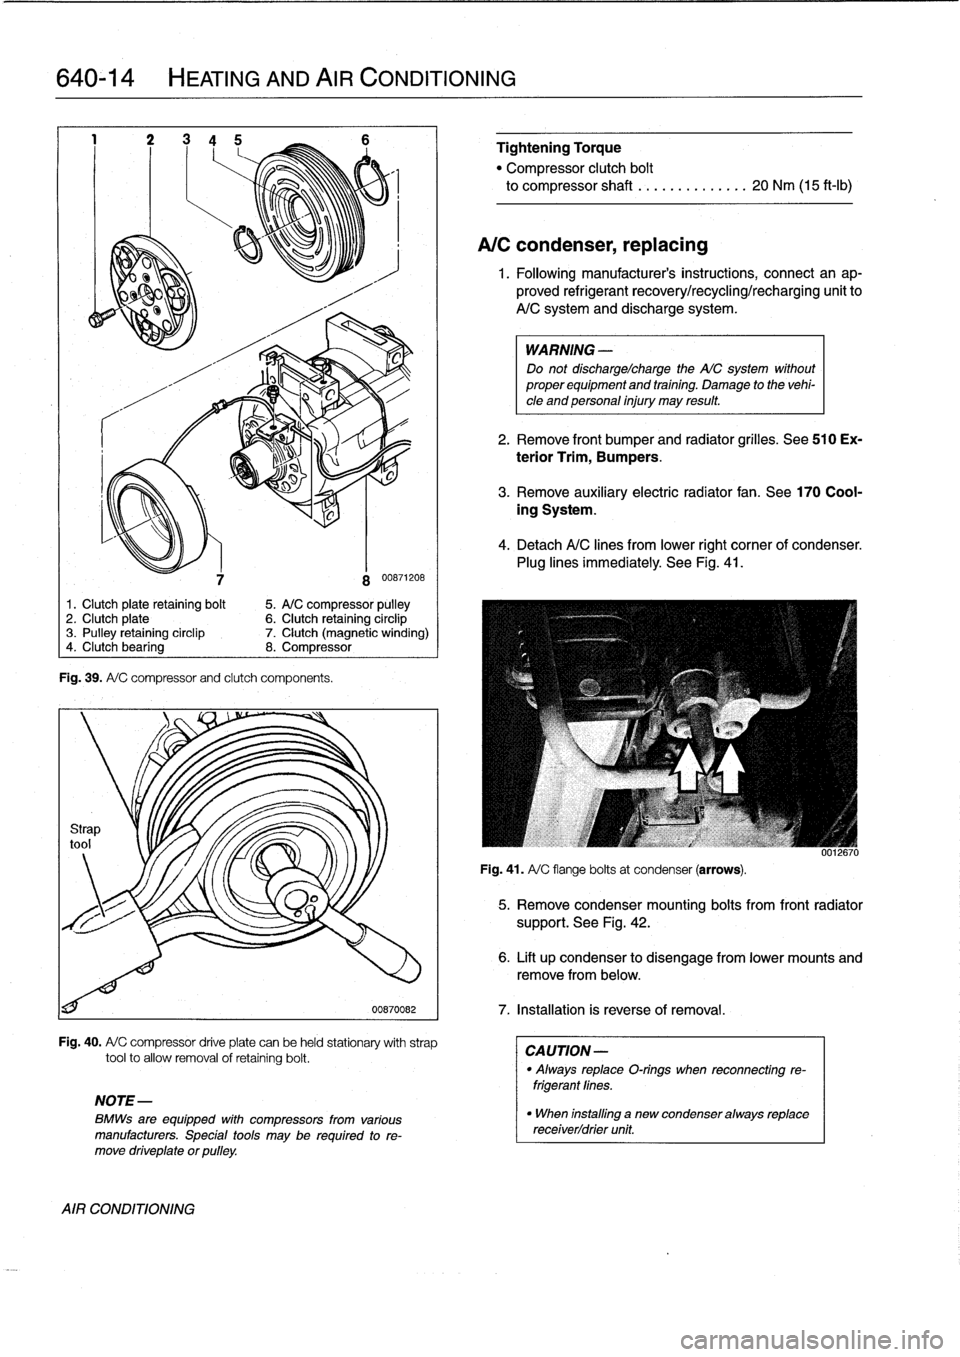 BMW 323i 1993 E36 Owners Manual 
640-14

	

HEATING
AND
AIR
CONDITIONING

7
Fig
.
39
.
A/
C
compressorand
clutch
components
.

8
00871208

1.
Clutch
plate
retaining
bolt

	

5
.
A/C
compressor
pulley
2
.
Clutch
plate

	

6
.
Clutch
